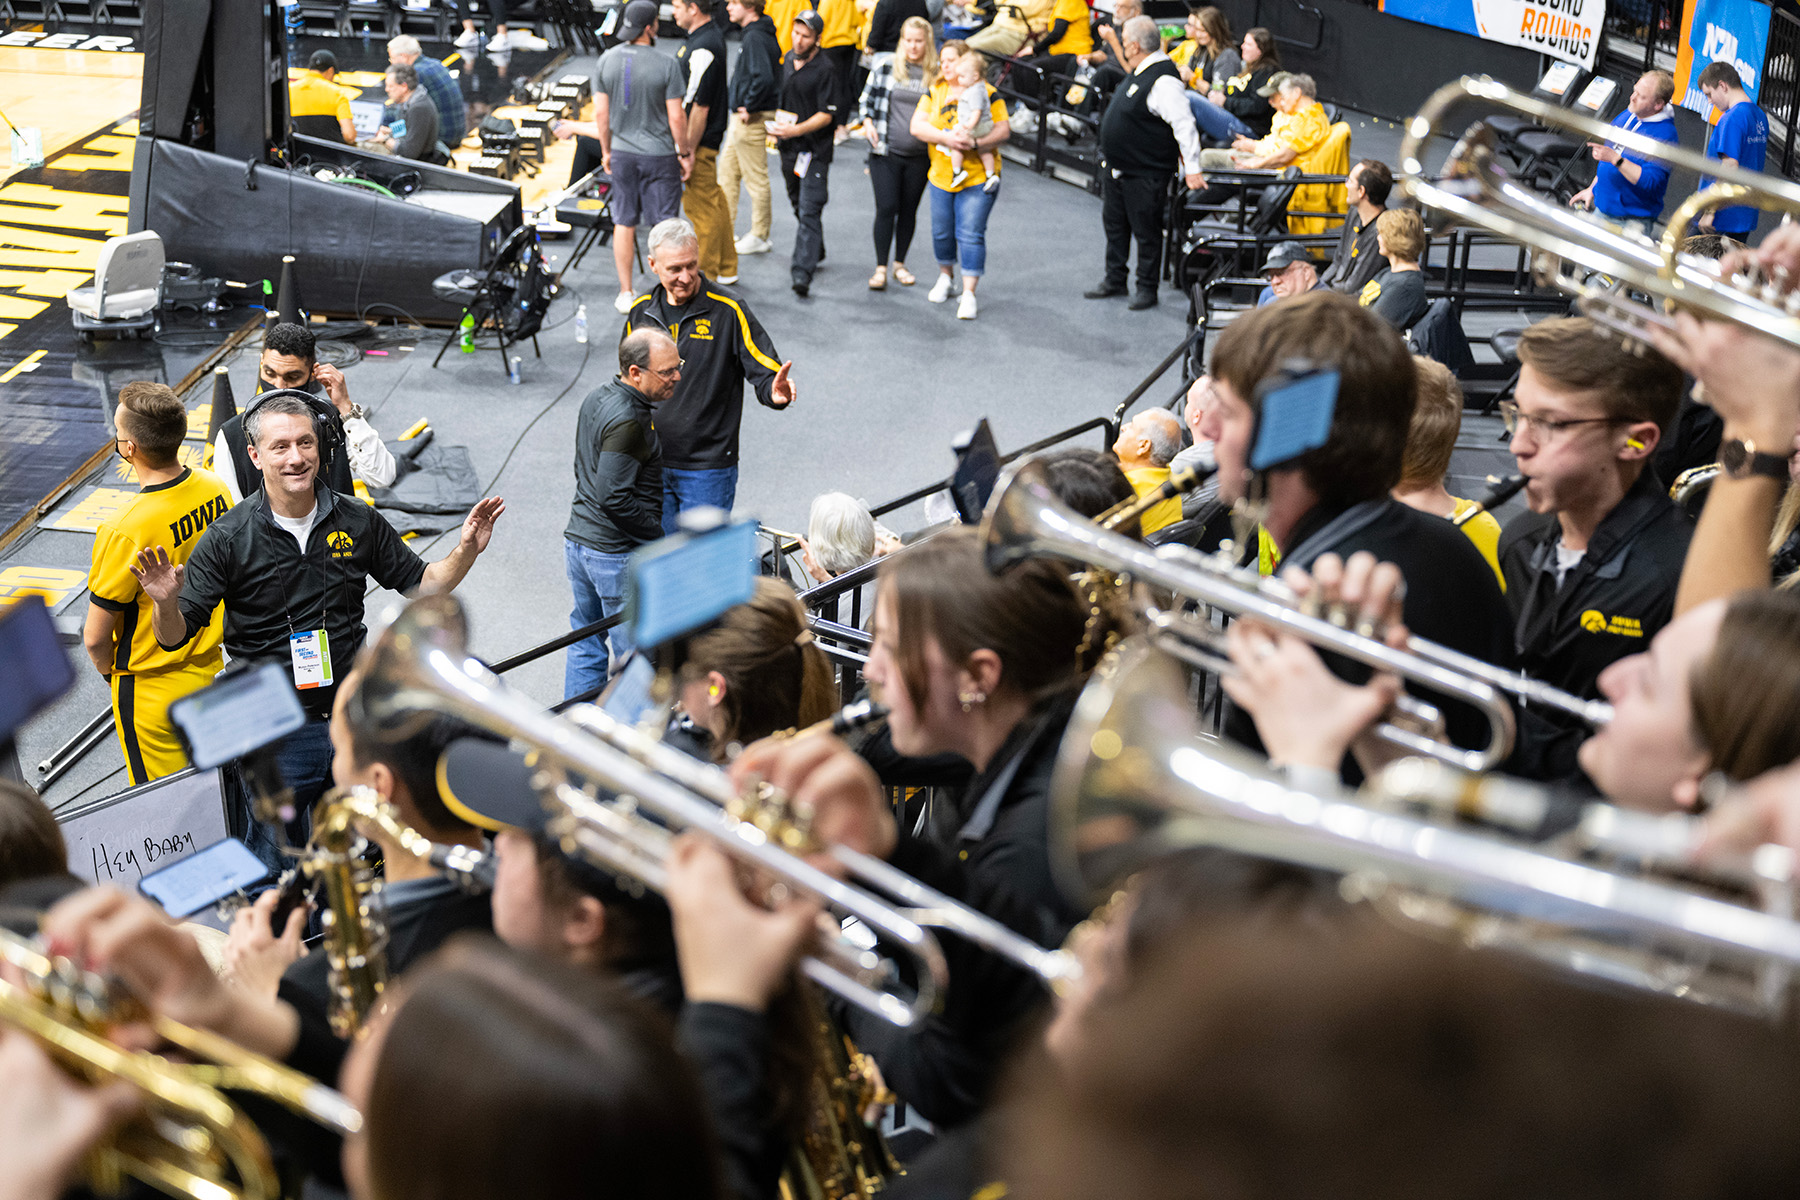 Iowa Pep Band performs in Carver-Hawkeye Arena